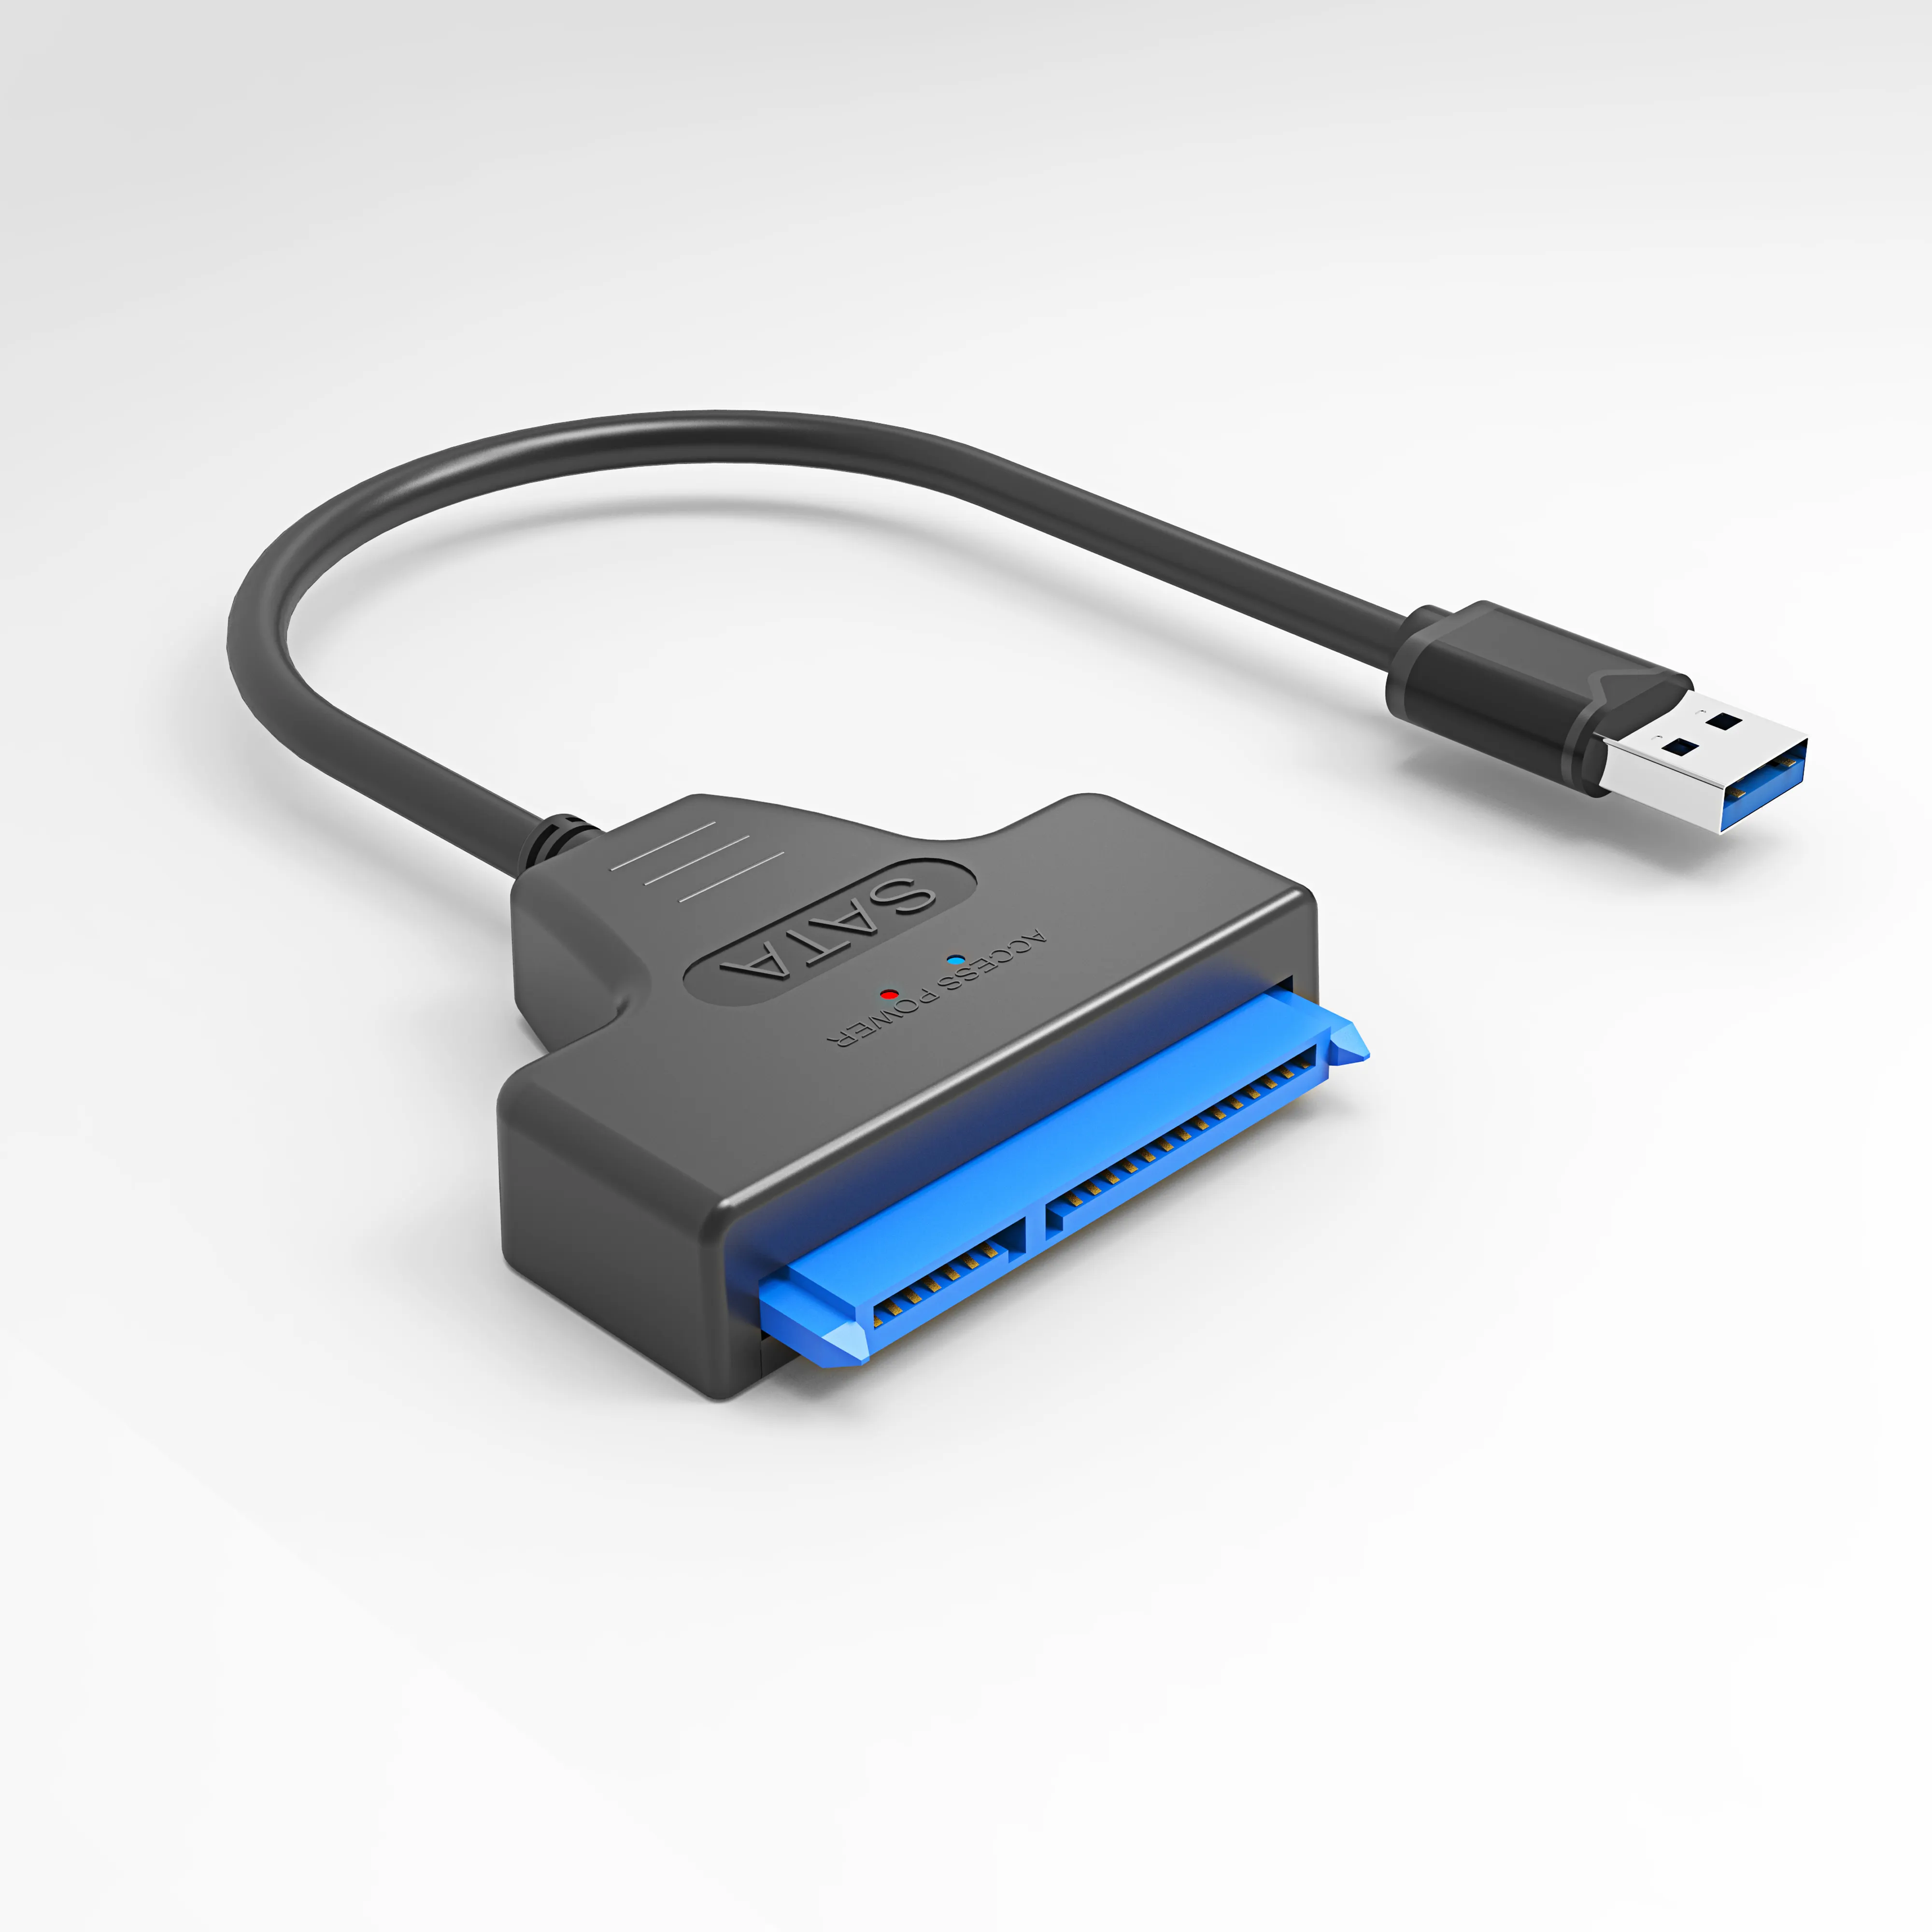 0.5m USB 3.0 to SATA Cable Computer IDE SATA Connector Adapter with 1153E chip SATA Cable Adapter to external HDD